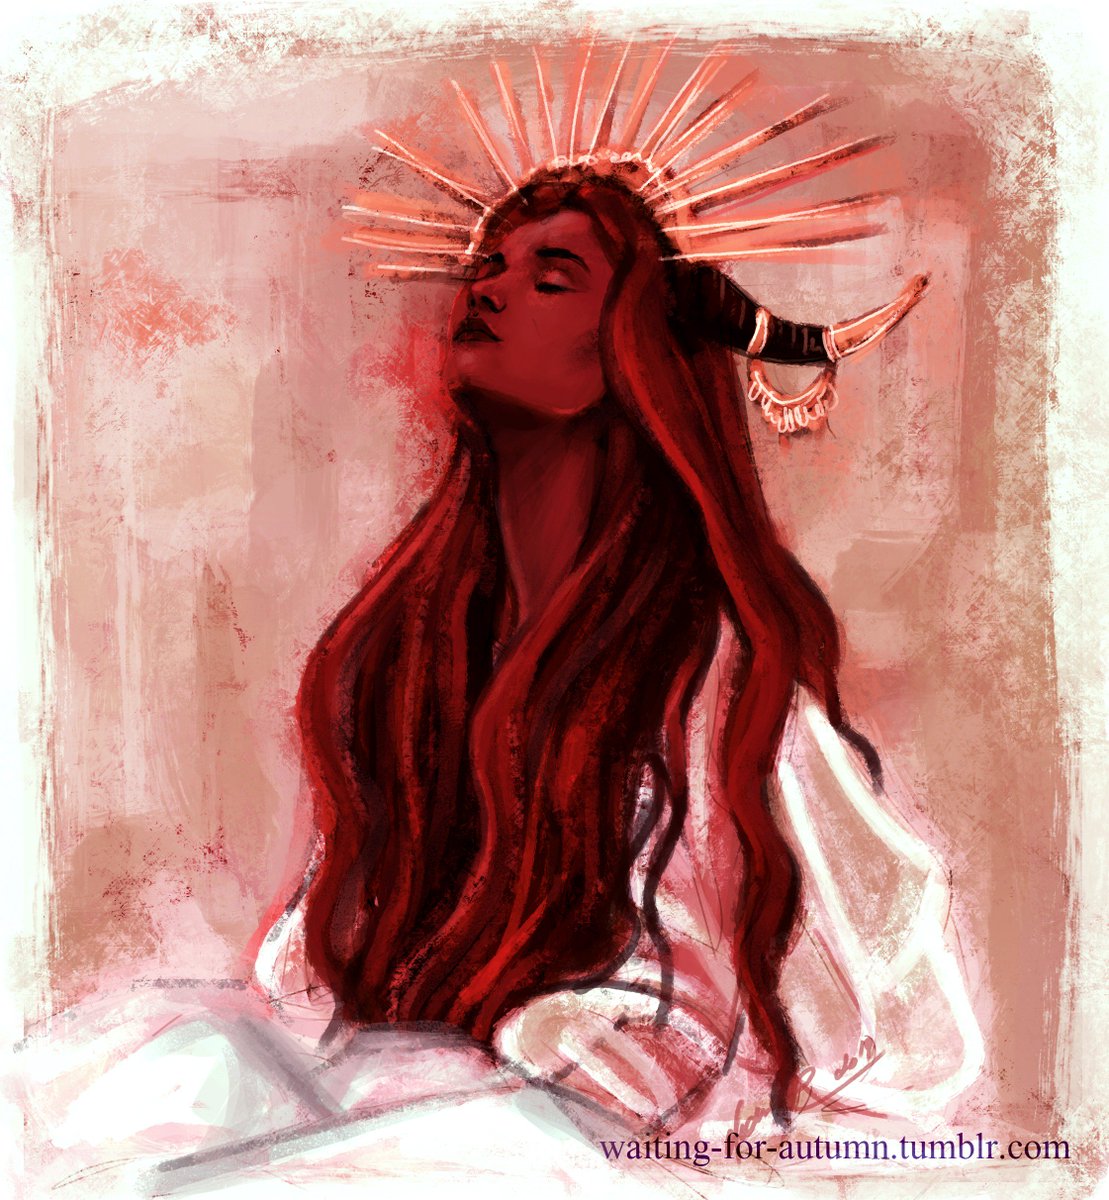 94. "The Ruby of the sea" a quick fanart/study/whatnot of Jester&...